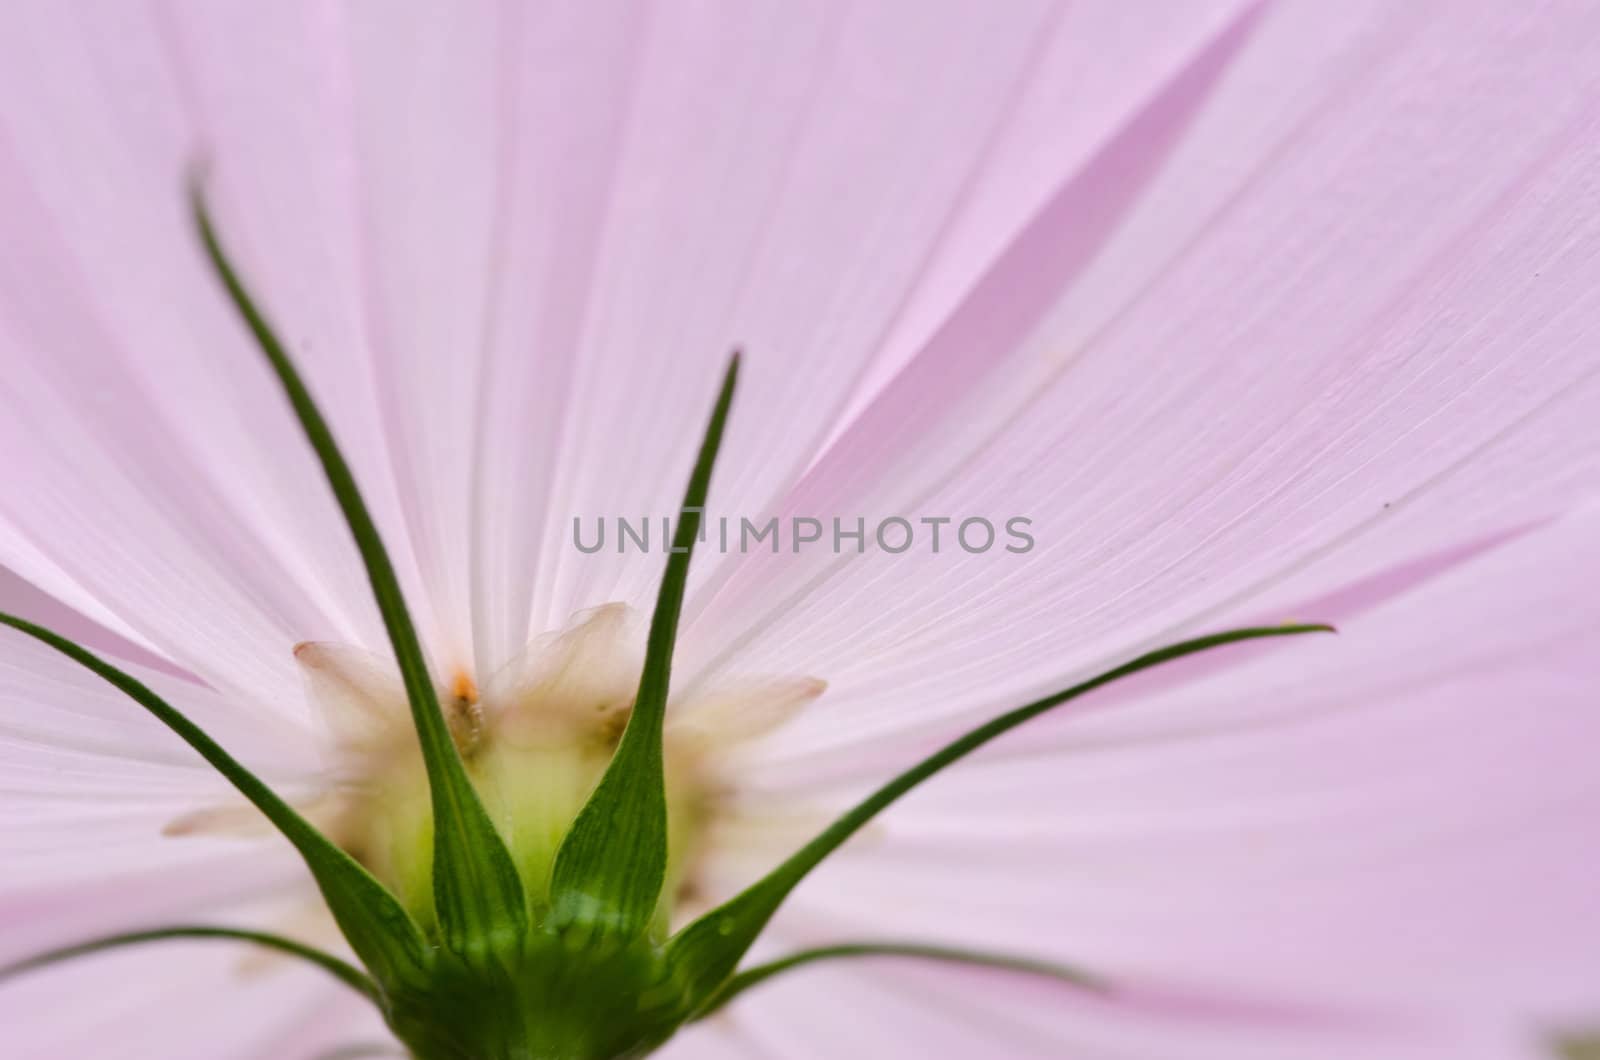 Close-up of a single pink cosmos flower, Cosmos bipinnatus, from behind